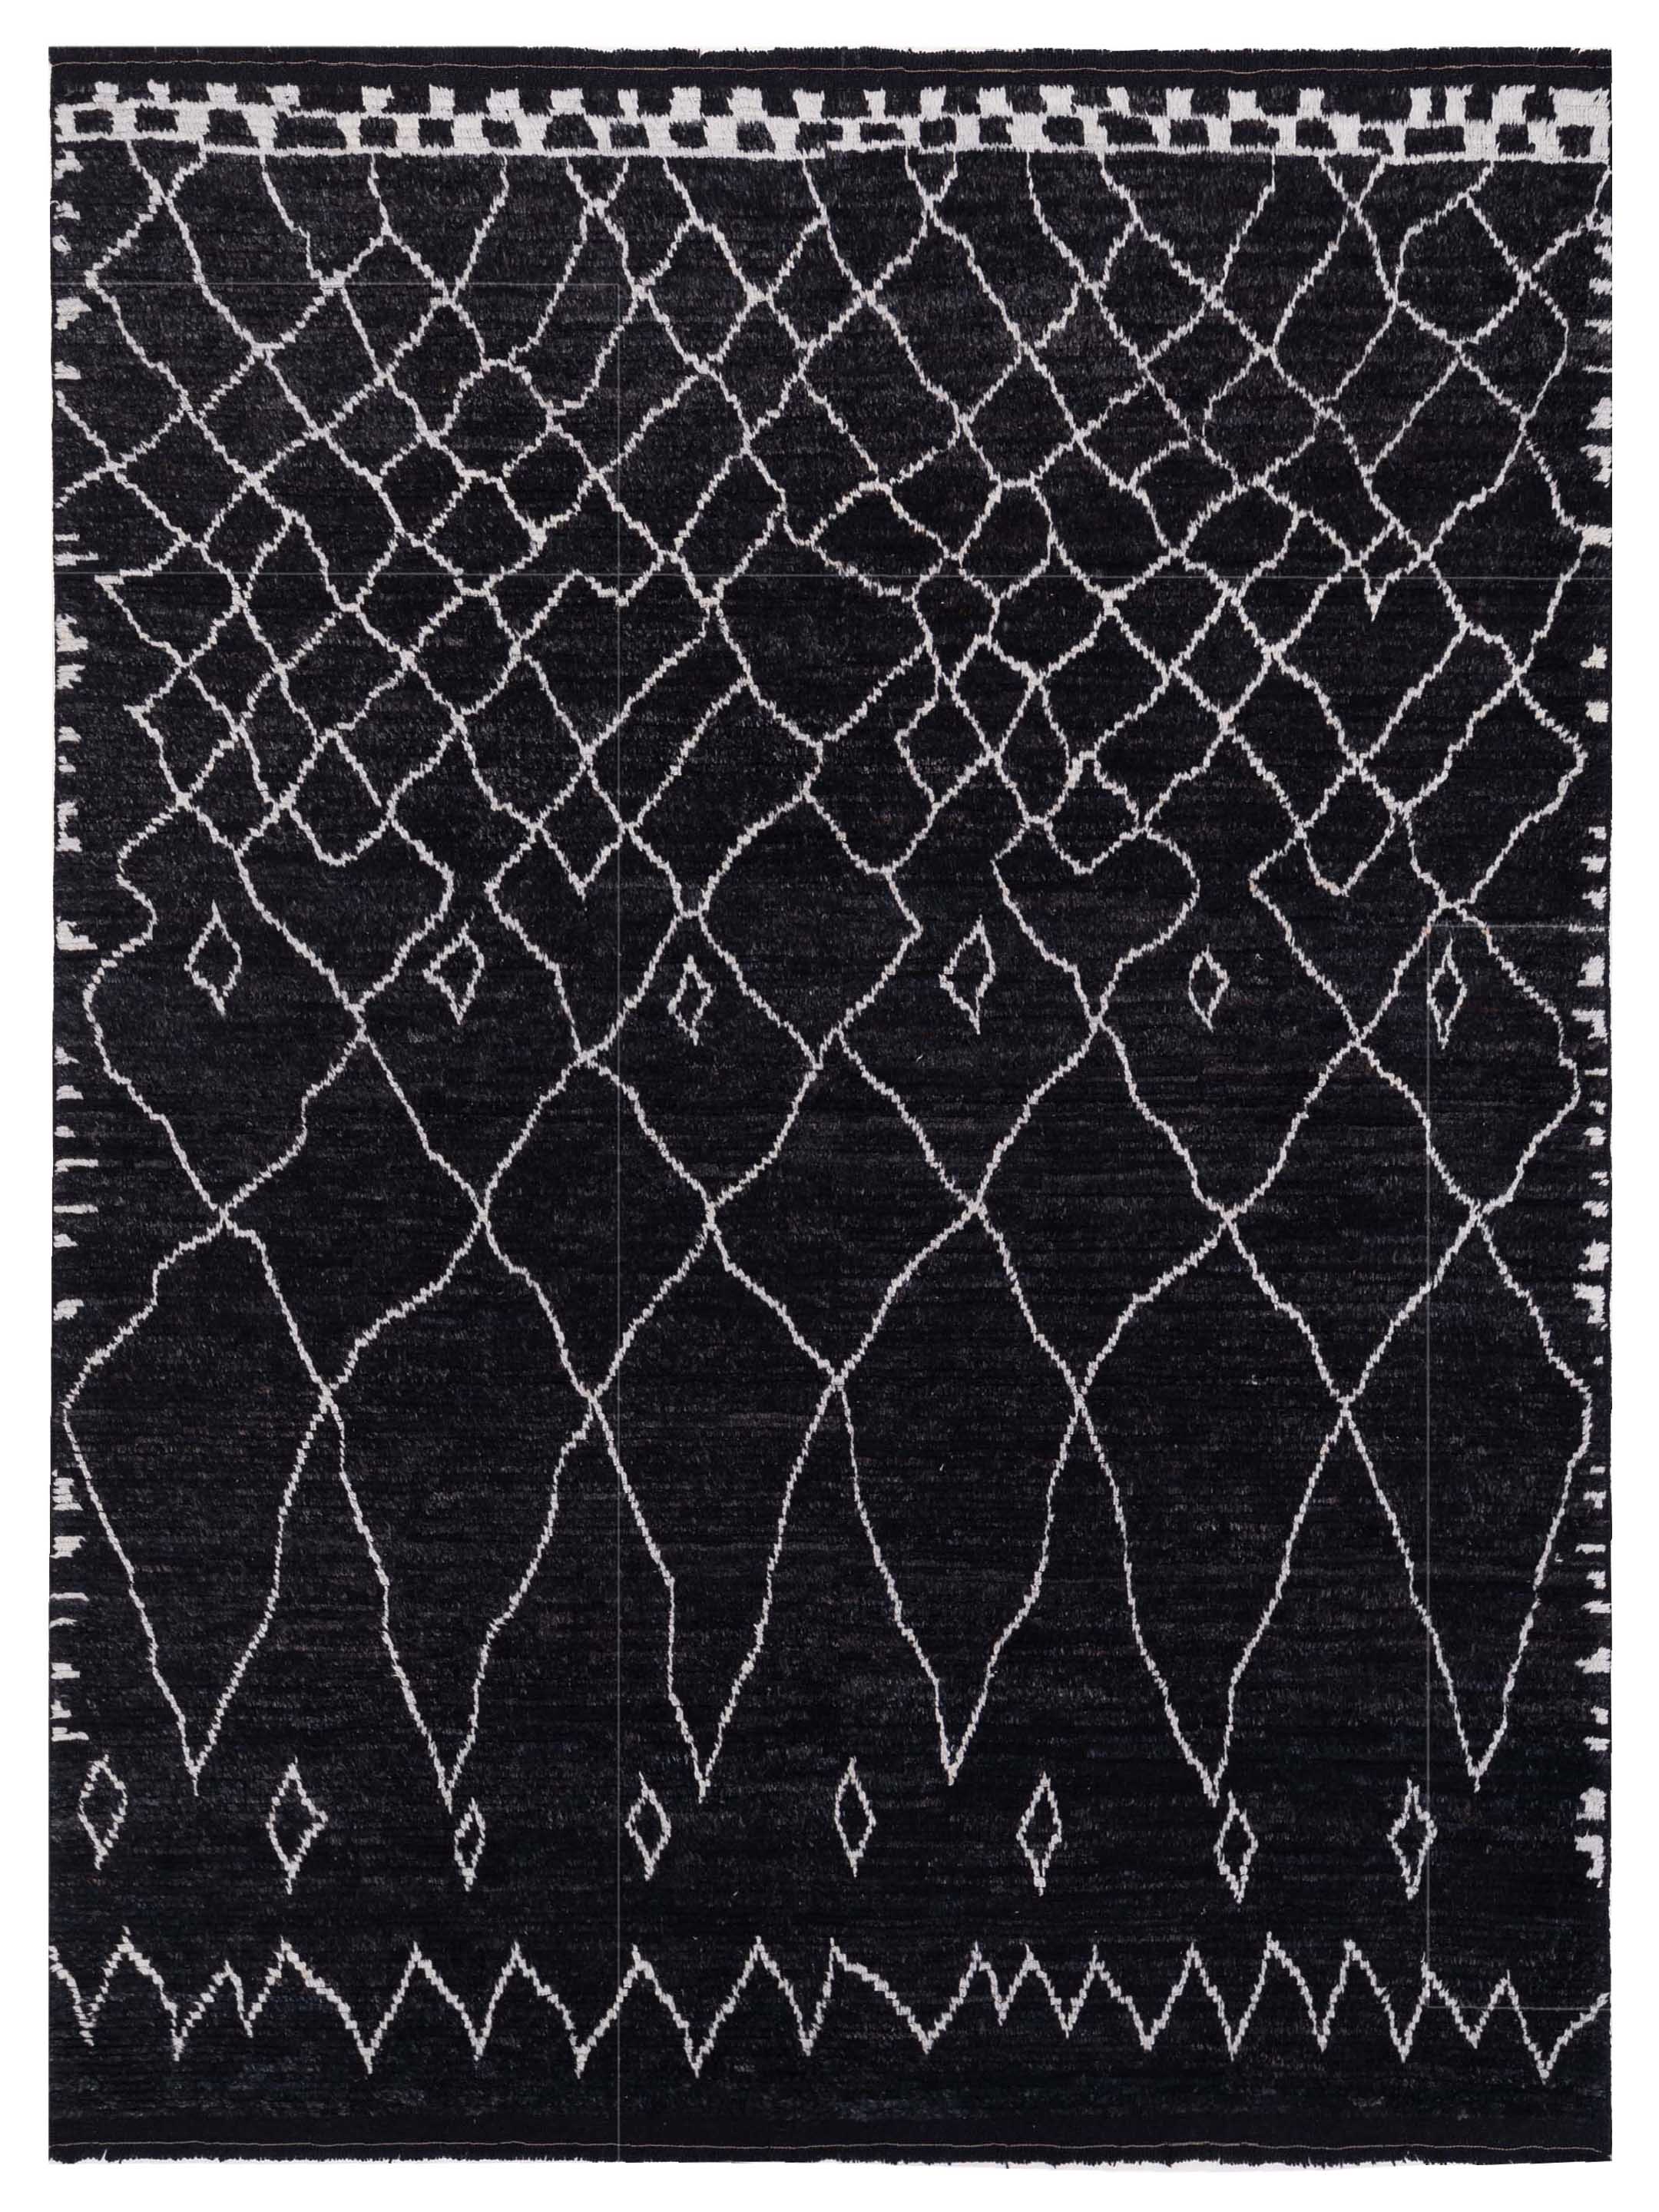 Black and white area rug